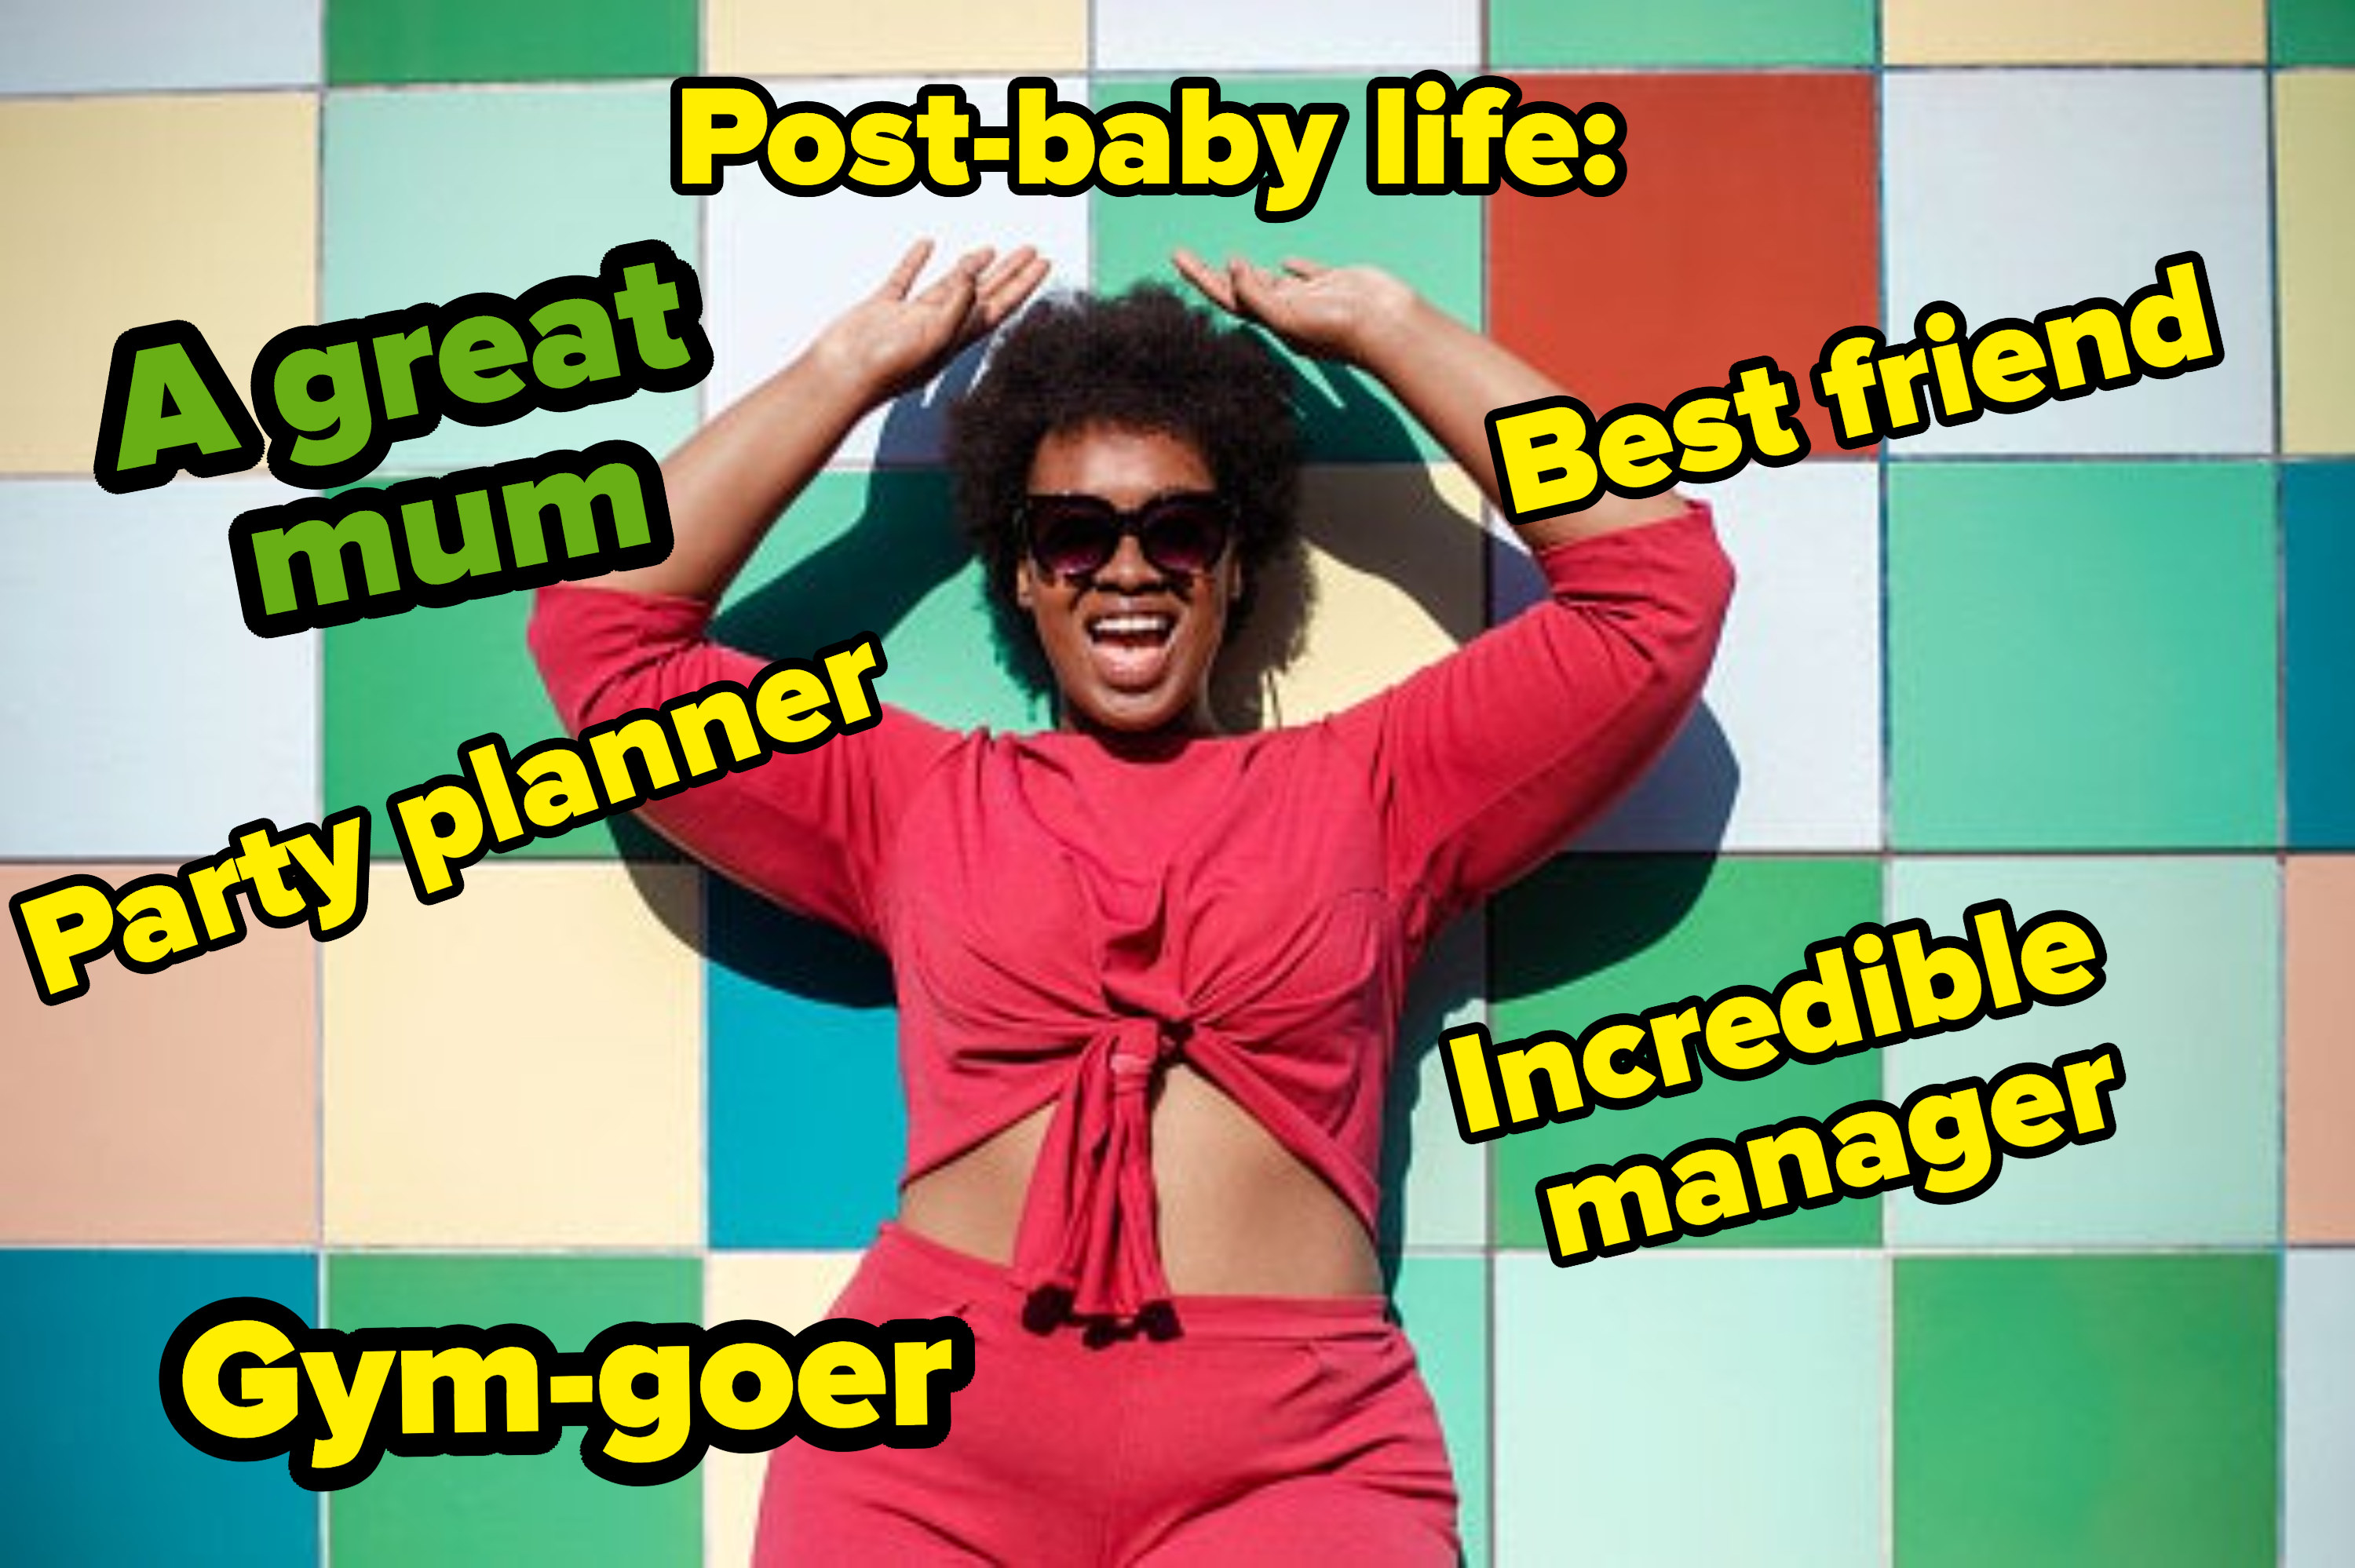 Above a photo of a happy woman we see the words &quot;post-baby life&quot;. Around the woman are the labels: the best mum, incredible manager, gym-goer, best friend, party planner.